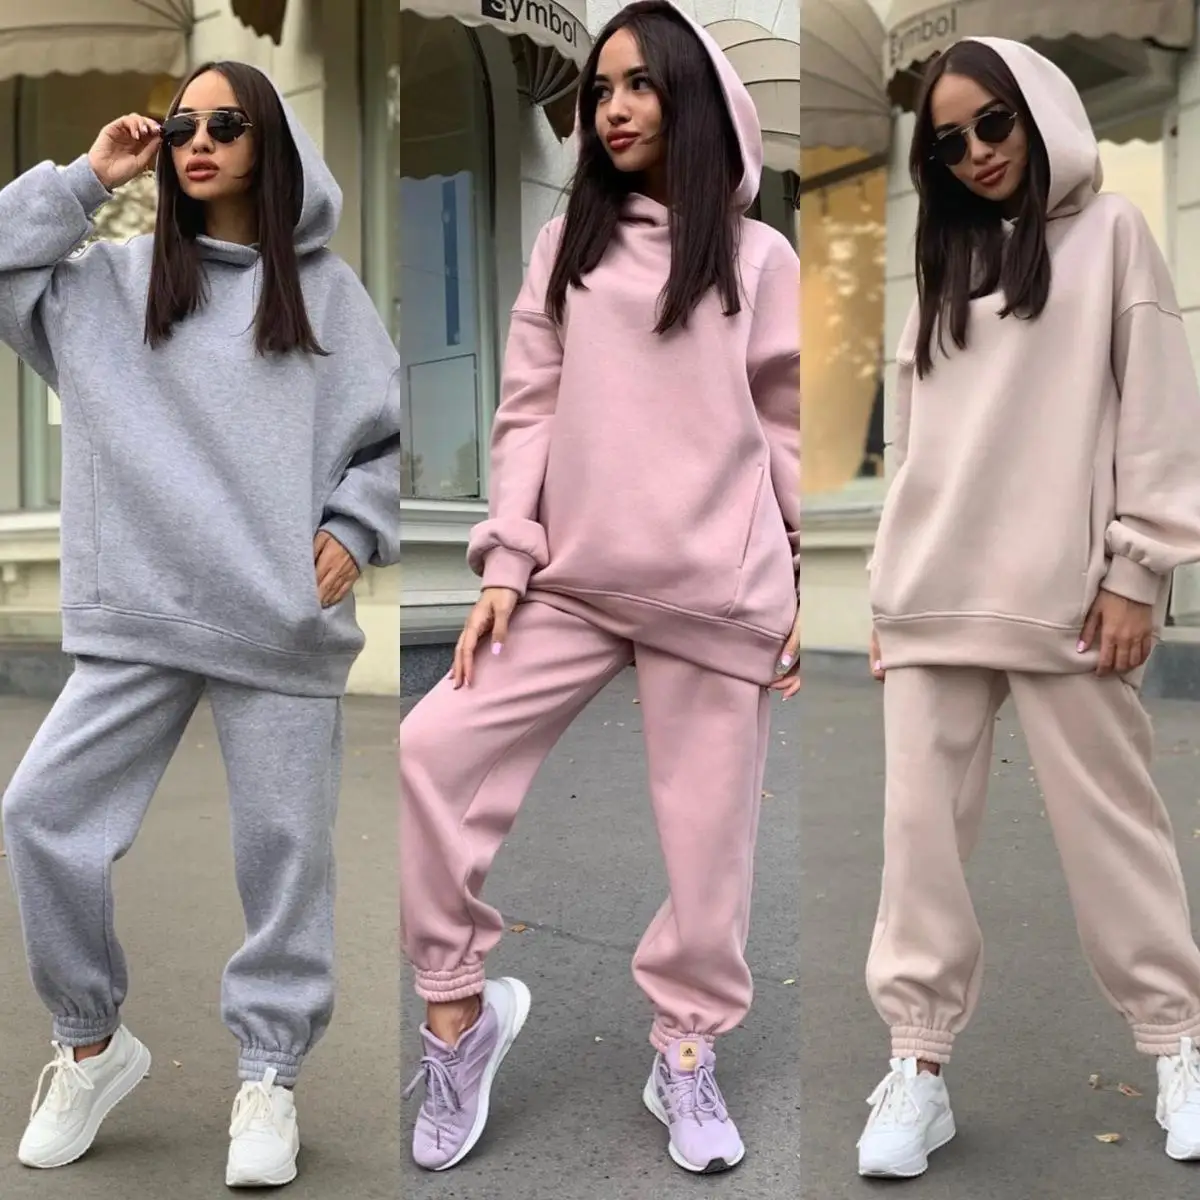 

Aachoae Solid Casual Tracksuit Women Sports 2 Pieces Set Sweatshirts Pullover Hoodies Suit 2020 Home Sweatpants Shorts Outfits